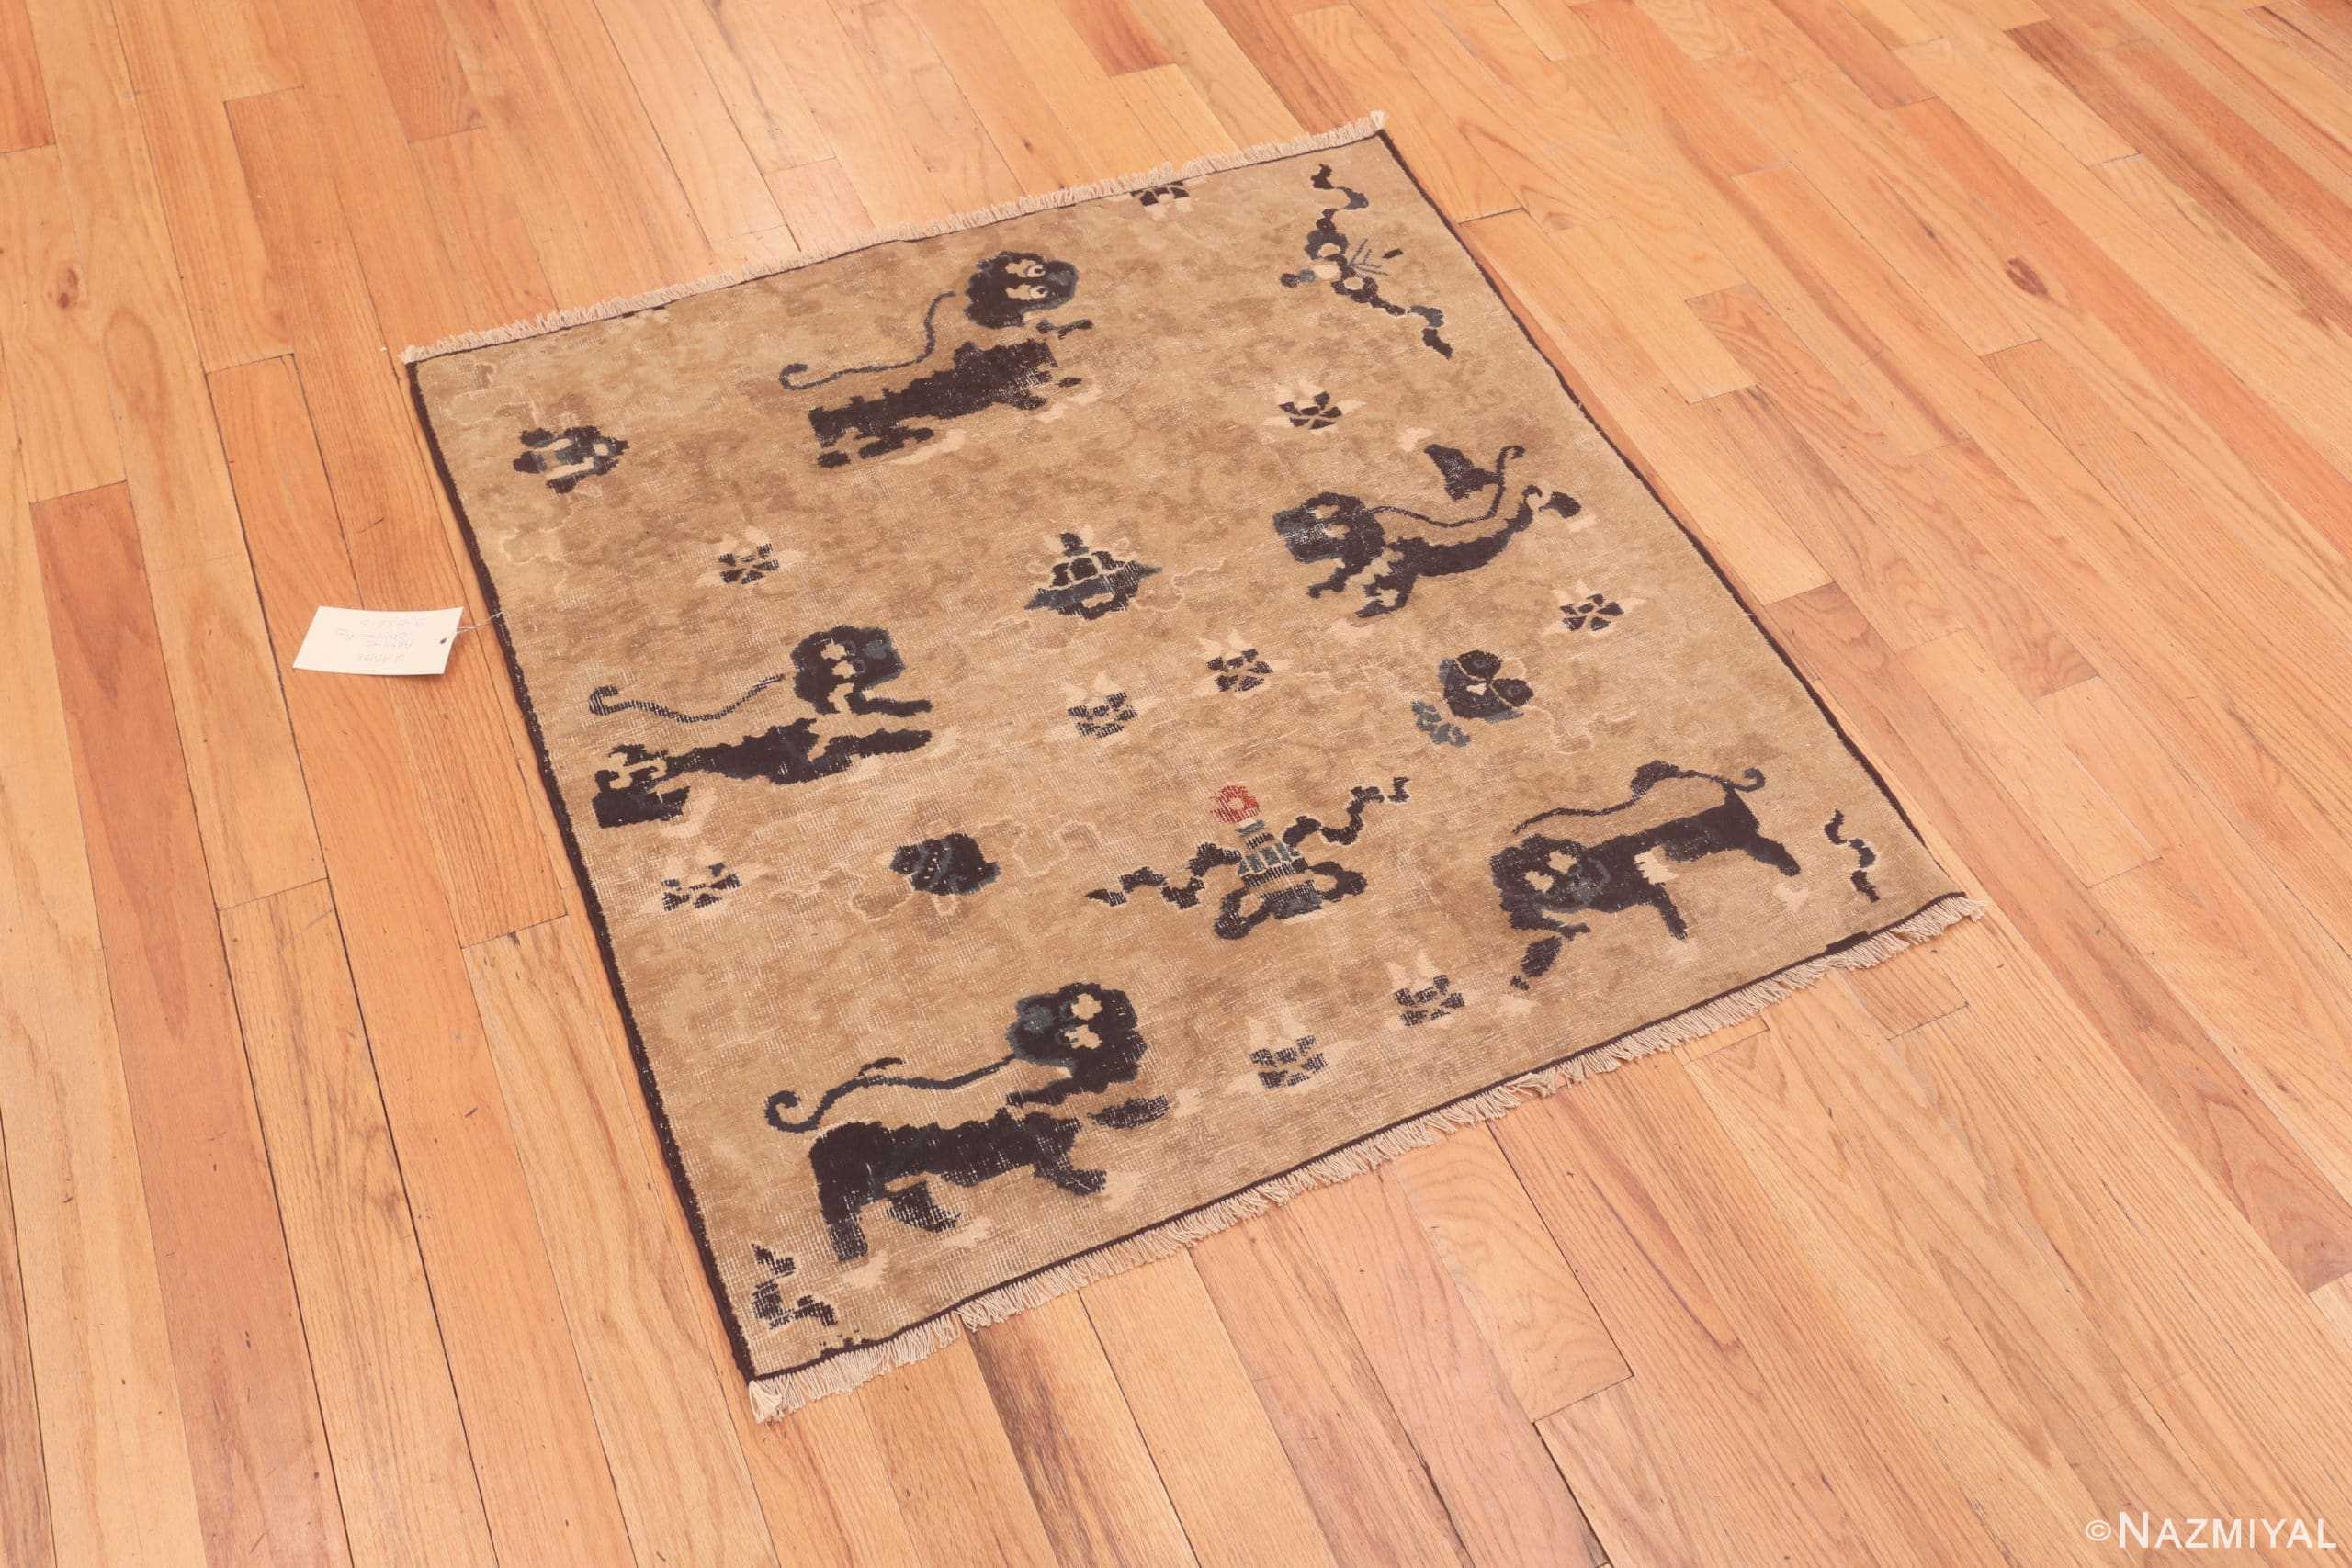 Side Of Square Antique Chinese Dragon Design Rug 43138 by Nazmiyal Antique Rugs